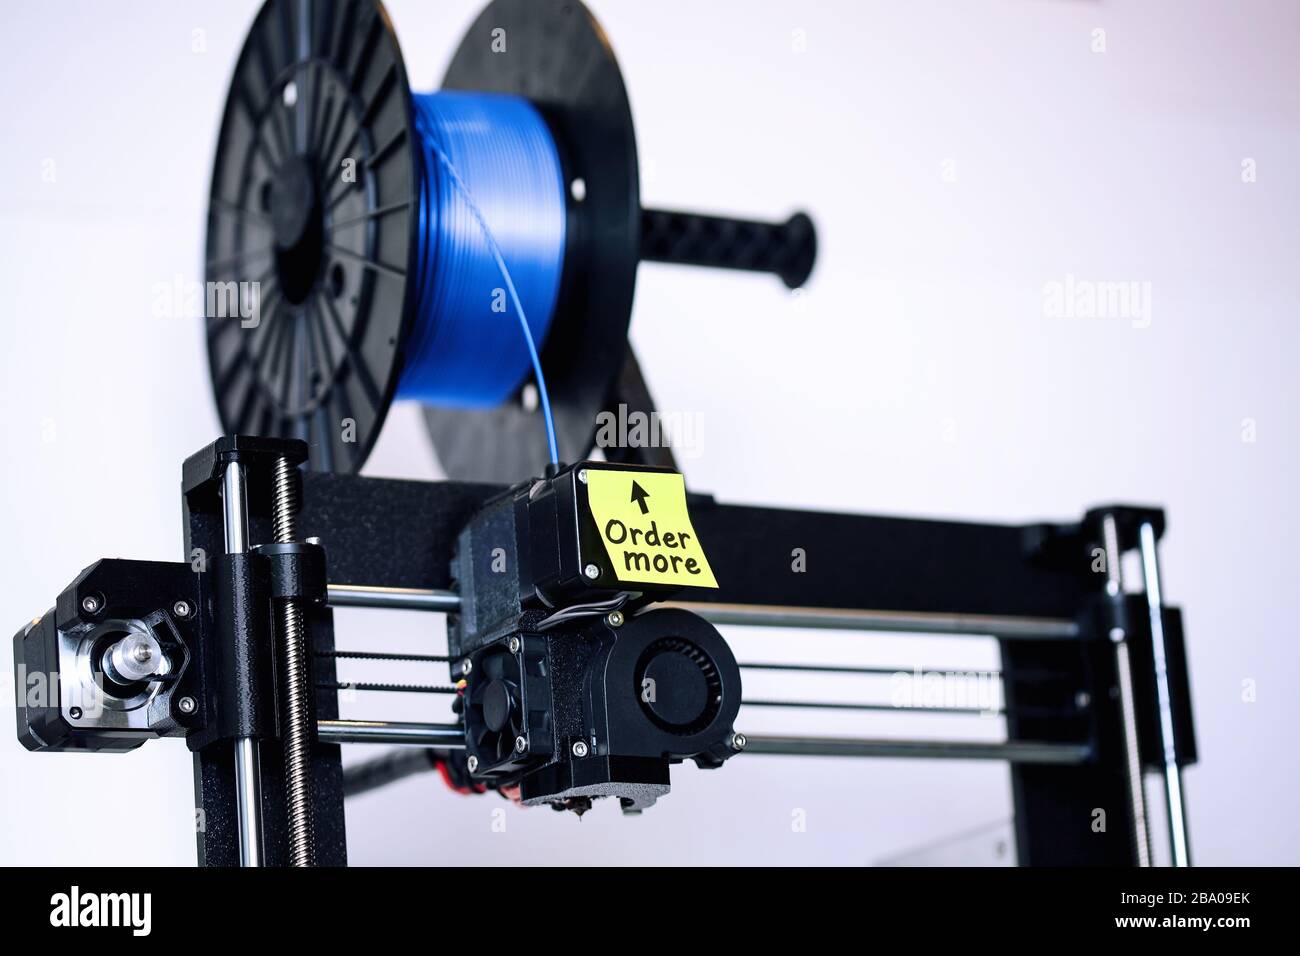 A FDM style 3d printer that has a spool of filament that is running low, and a sticky note as a reminder to order more silk PLA type of filament. Stock Photo